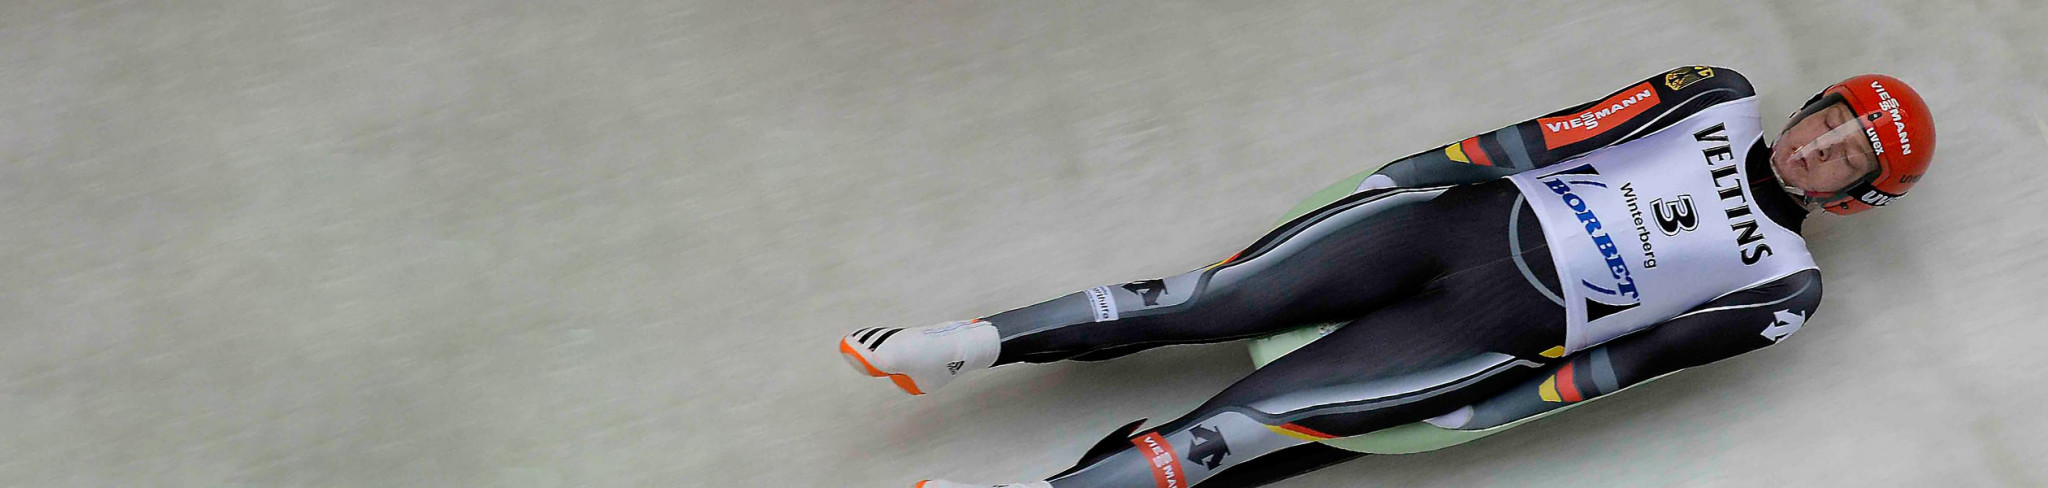 Home athletes tipped to dominate at Junior Luge World Championships in Altenberg